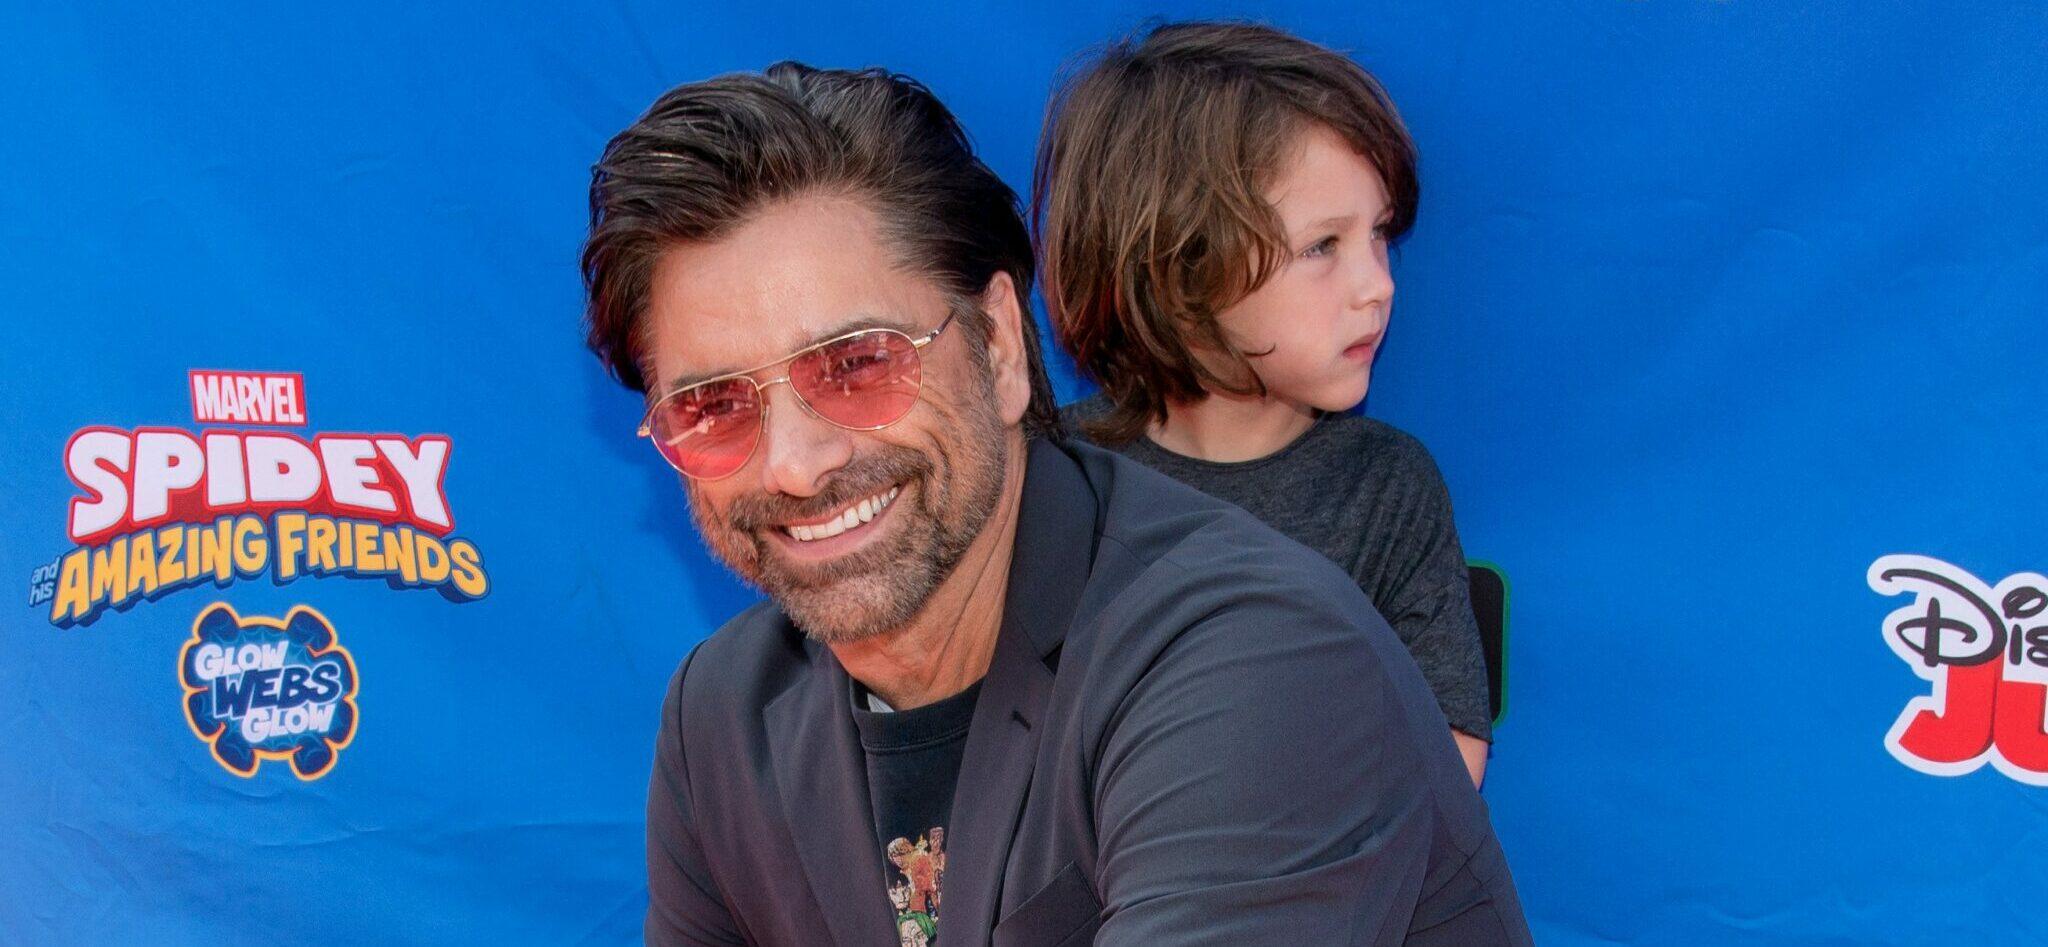 John Stamos and Billy Stamos attend Marvel's Spidey and his Amazing Friends ''Glow Webs Glow'.